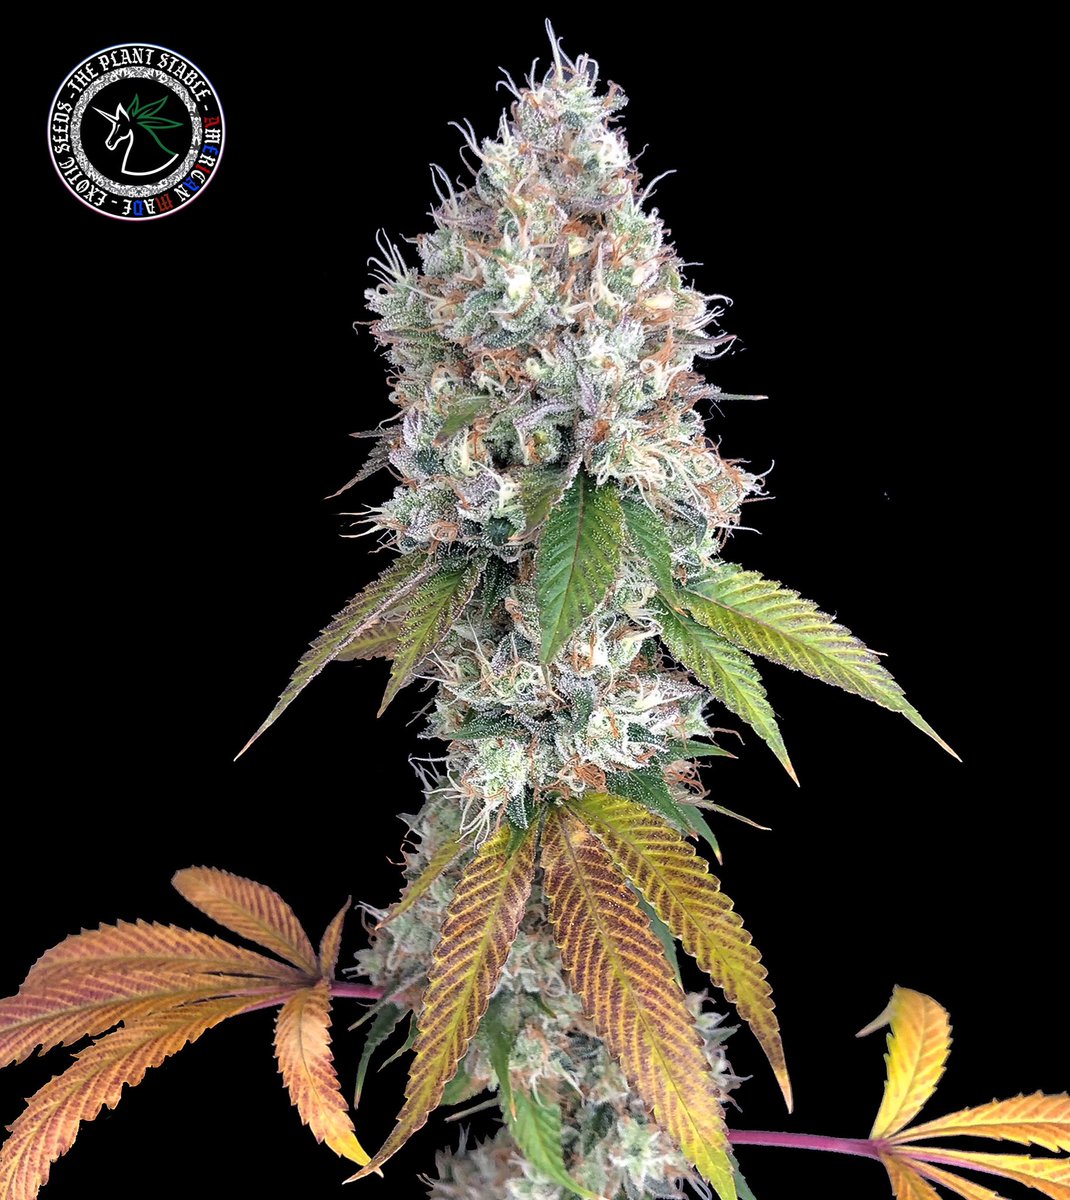 MO GMO

( Notorious x Garlic Daiquiri )
Created, Hunted & Cultivated by Yours Truly 

#mogmo #cannabisphotography #cannabisseeds #theplantstable #cannabis #farmbillcompliant